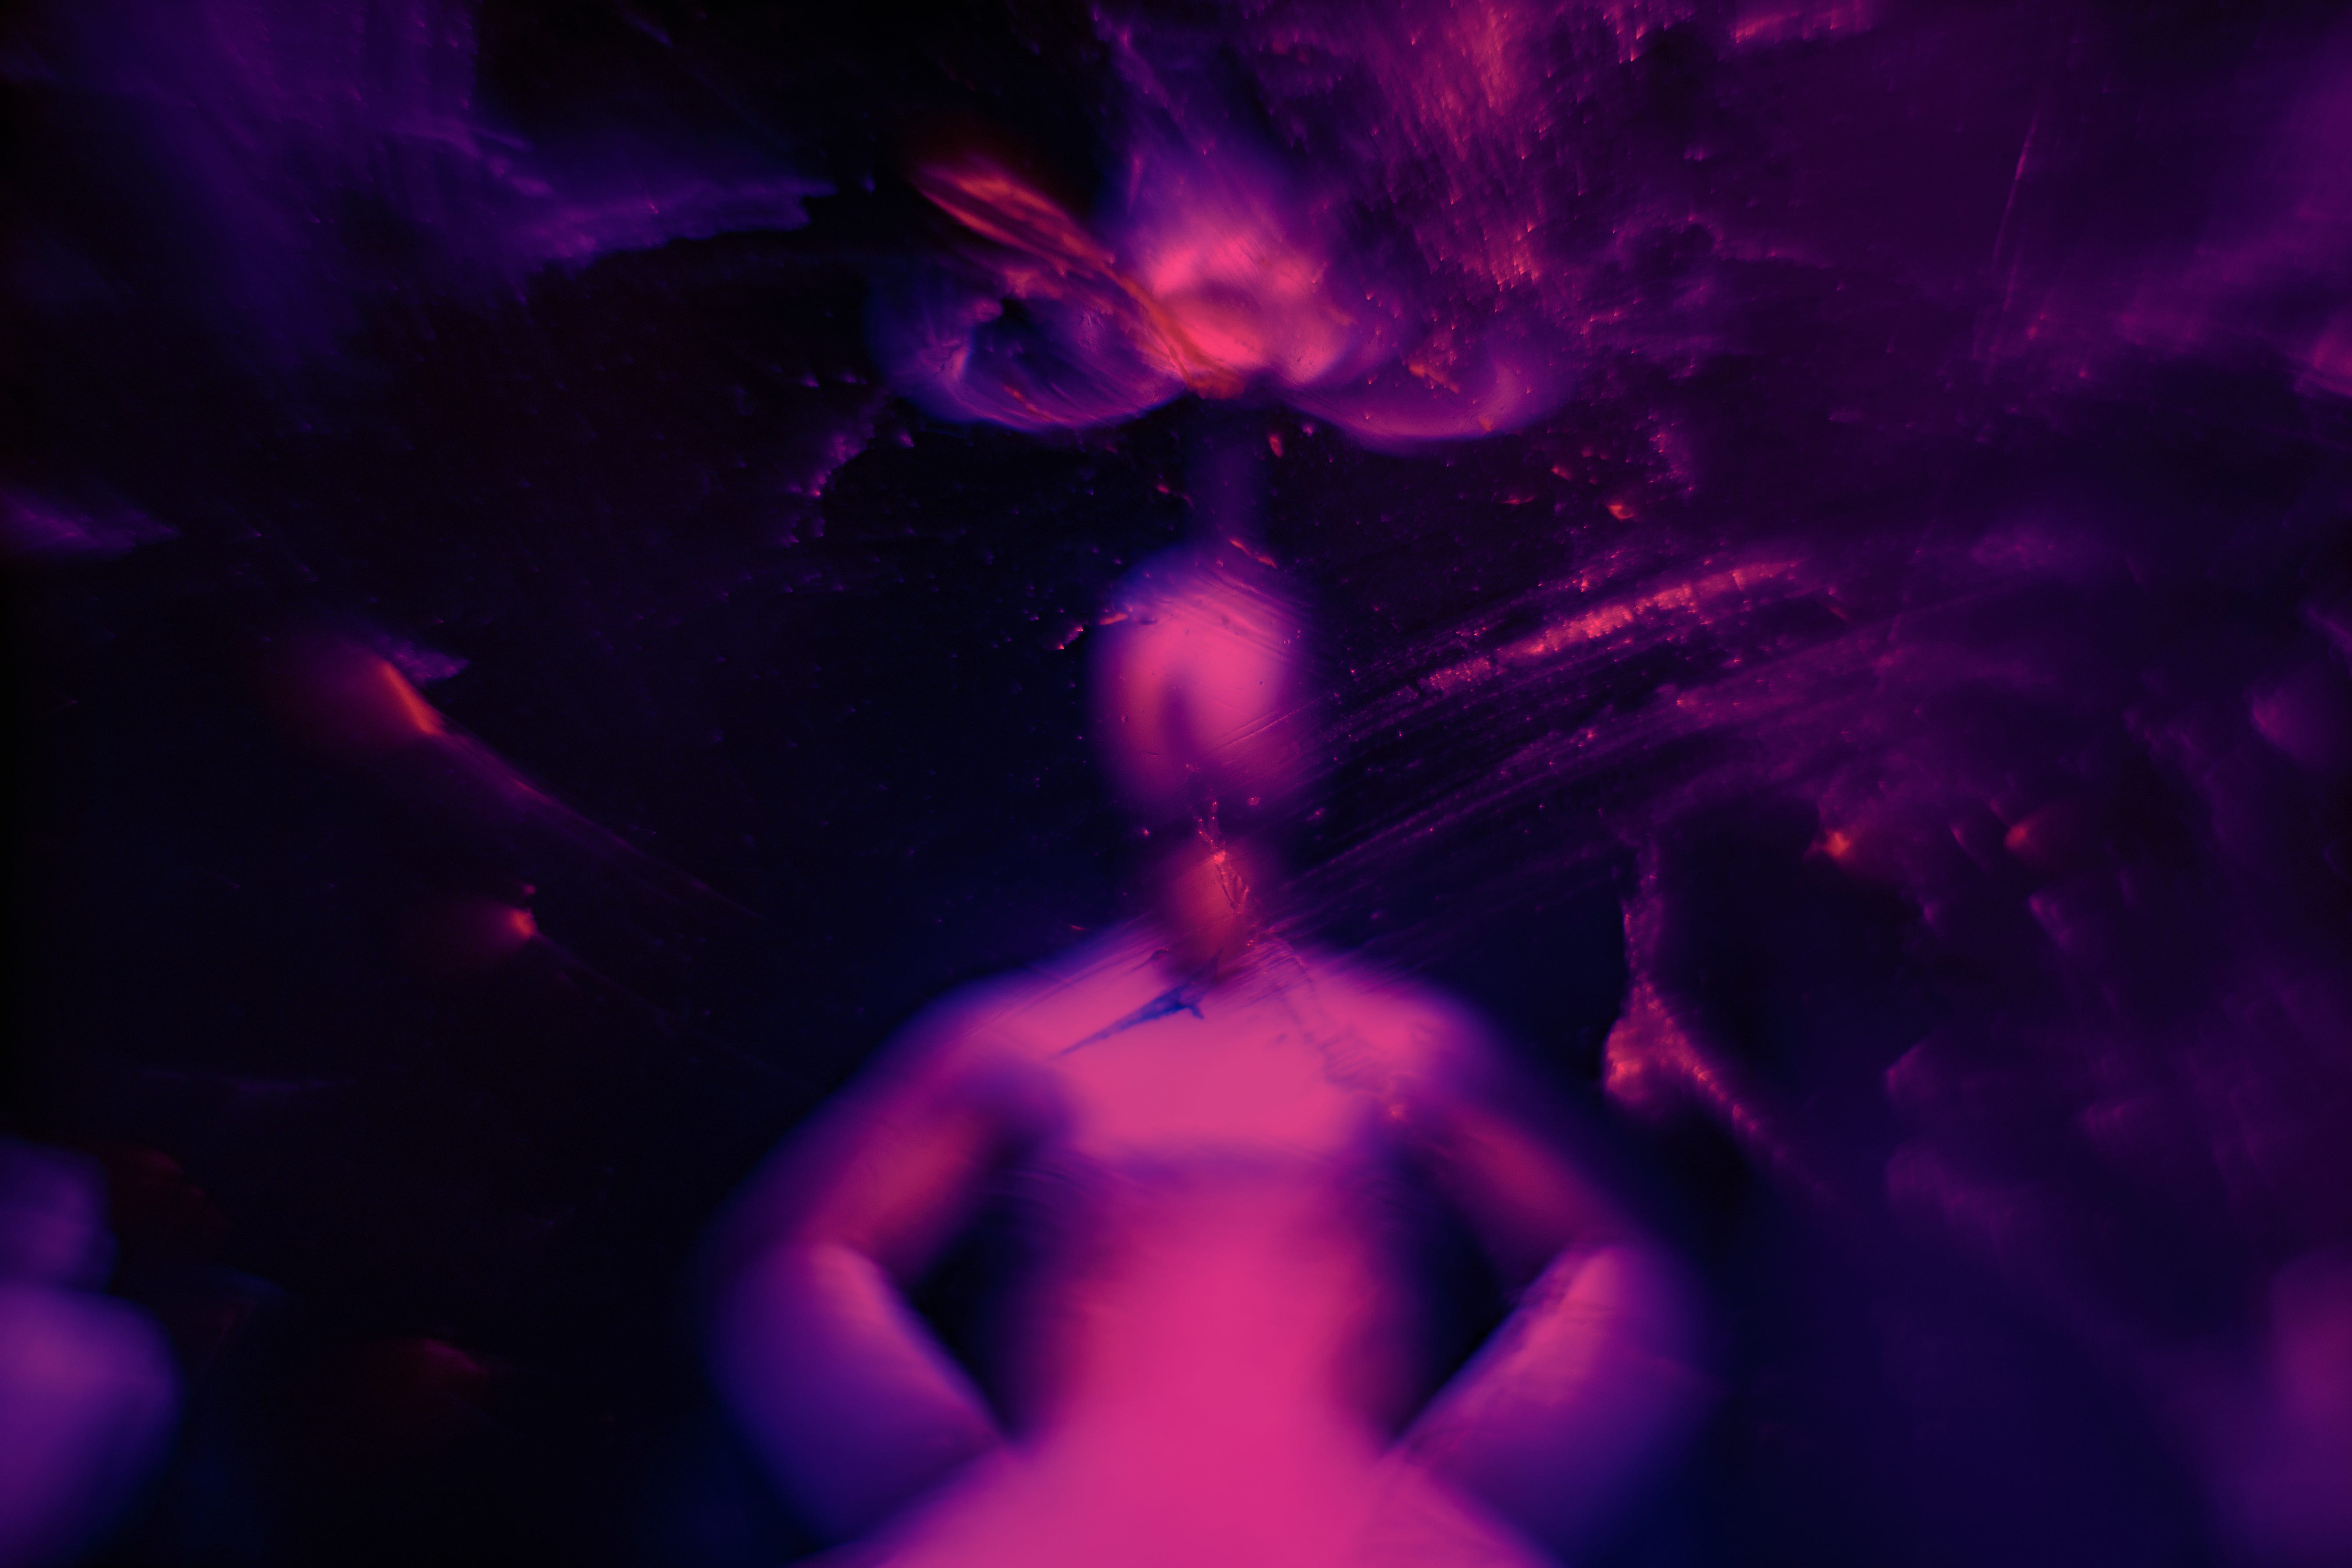 Psychadelic pink and purple picture looks blurrily human with light floating above the head